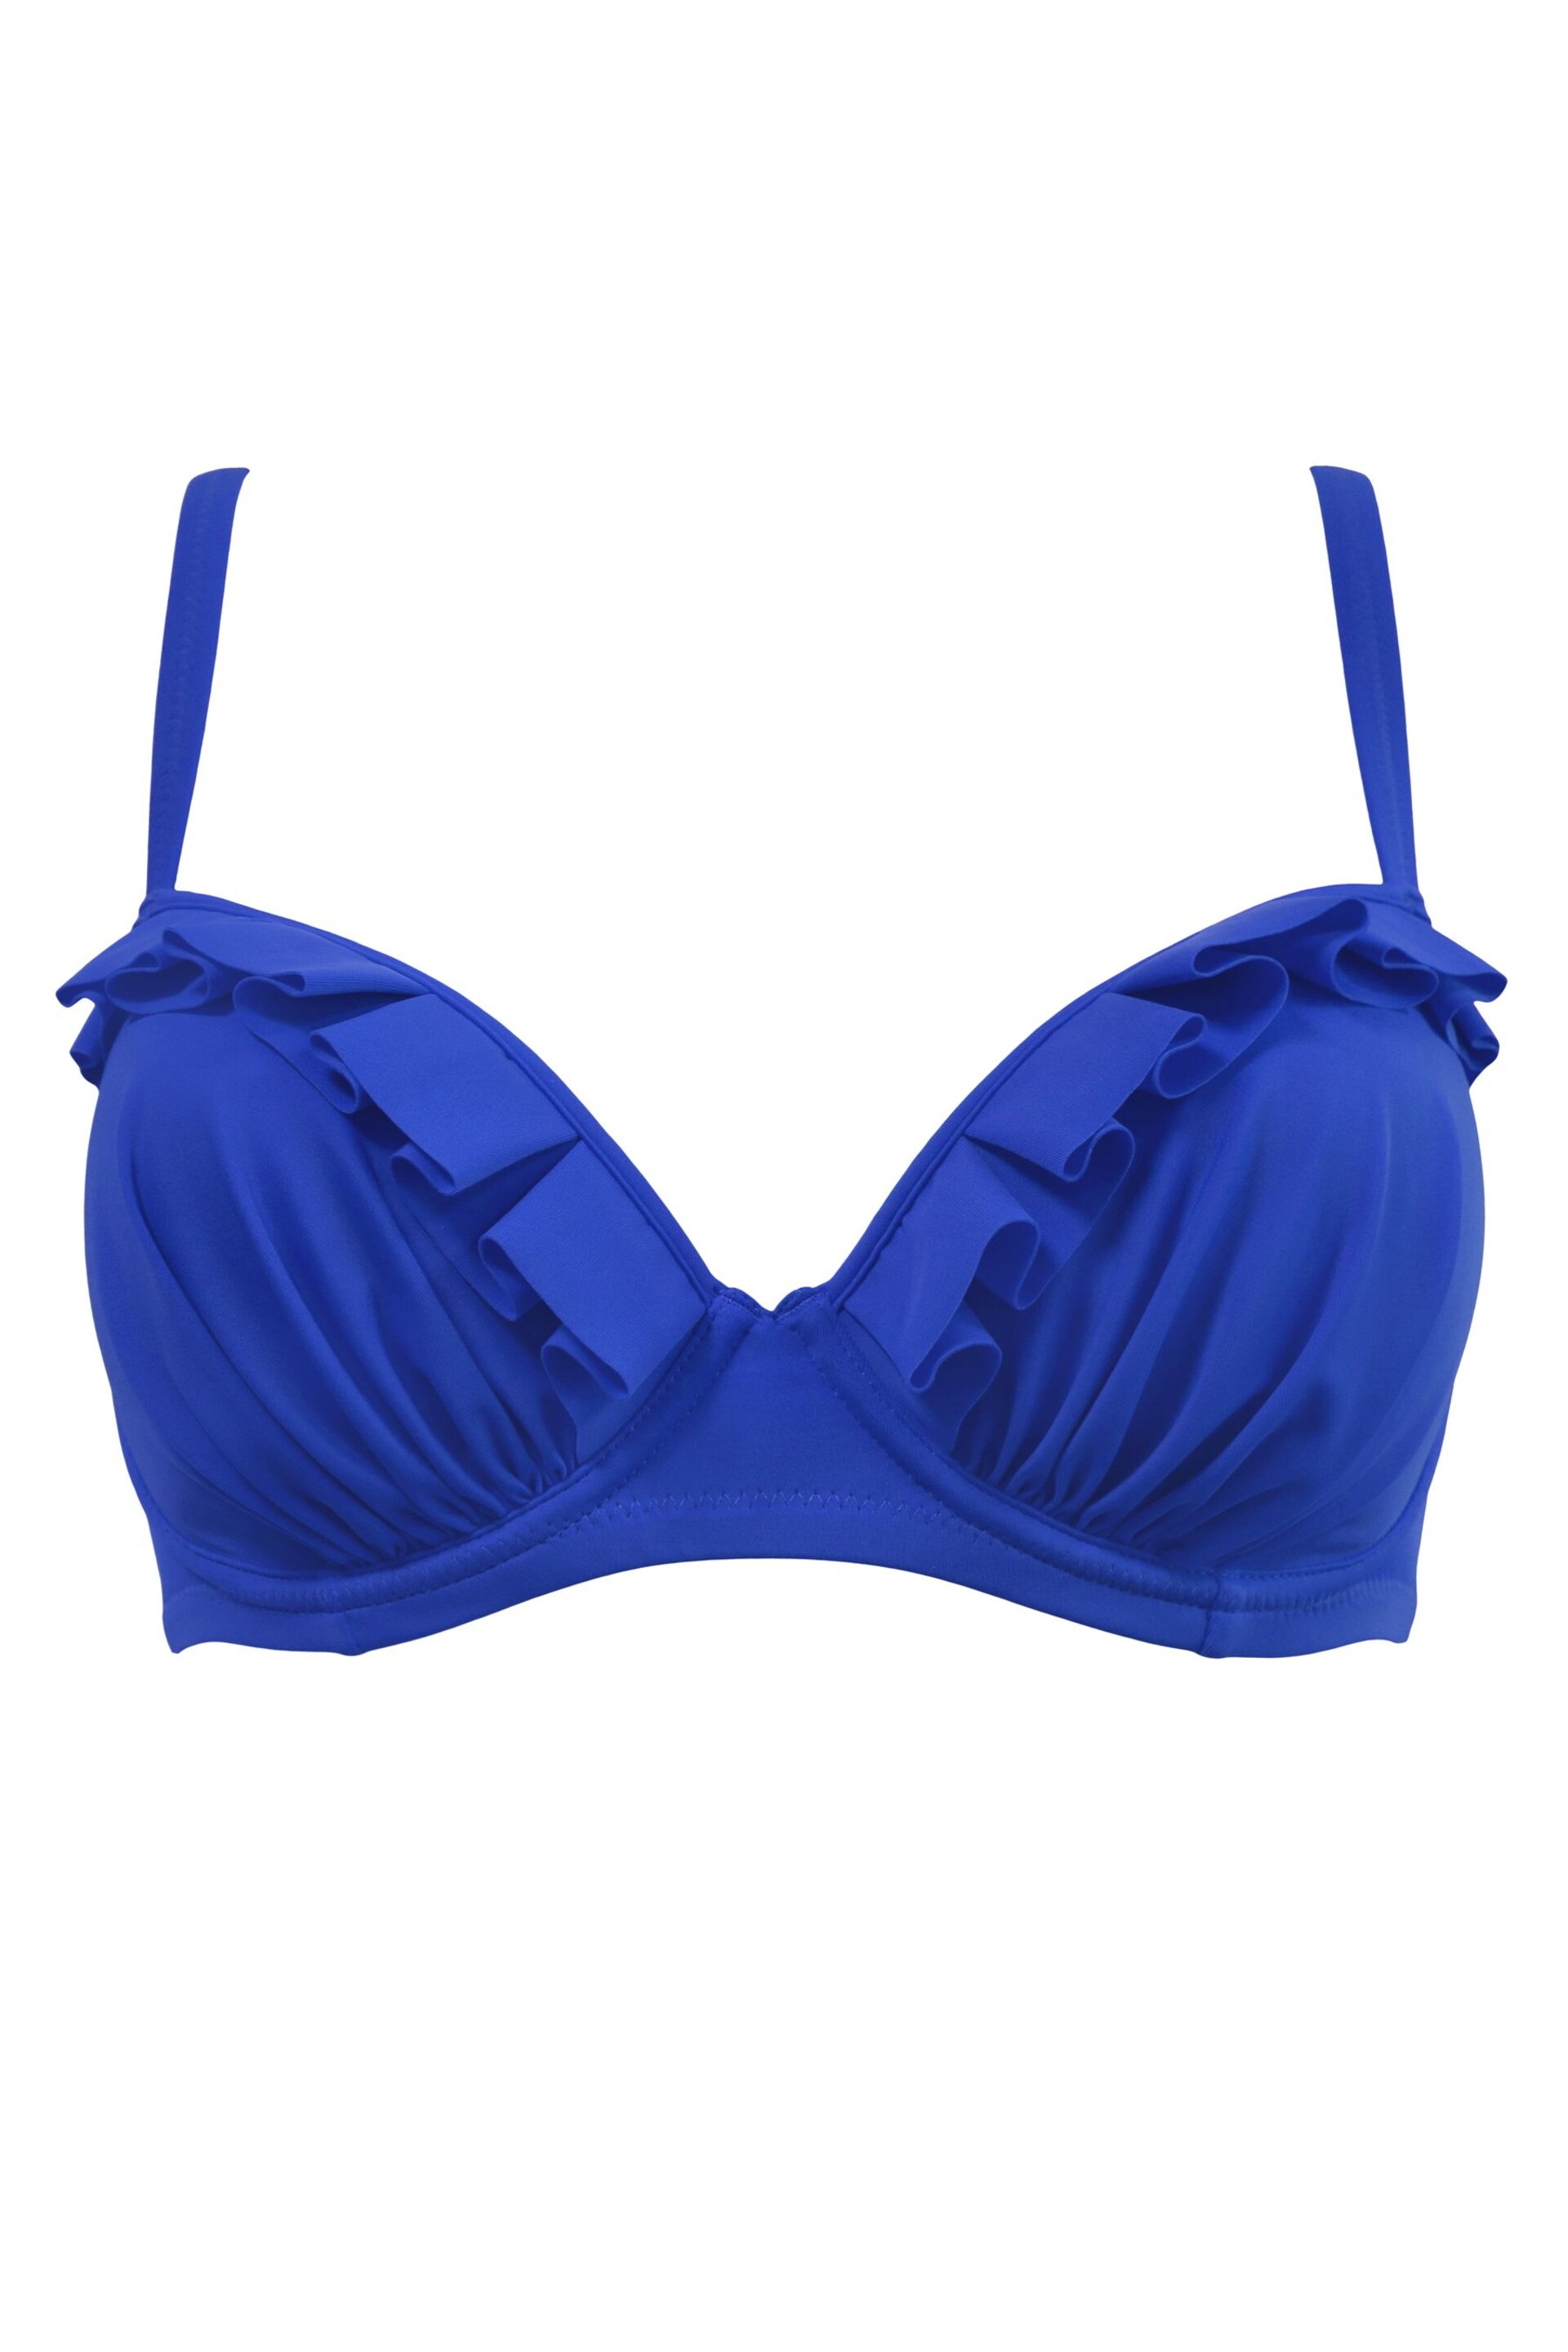 Pour Moi Blue Space Underwired Bikini Top - Image 4 of 5